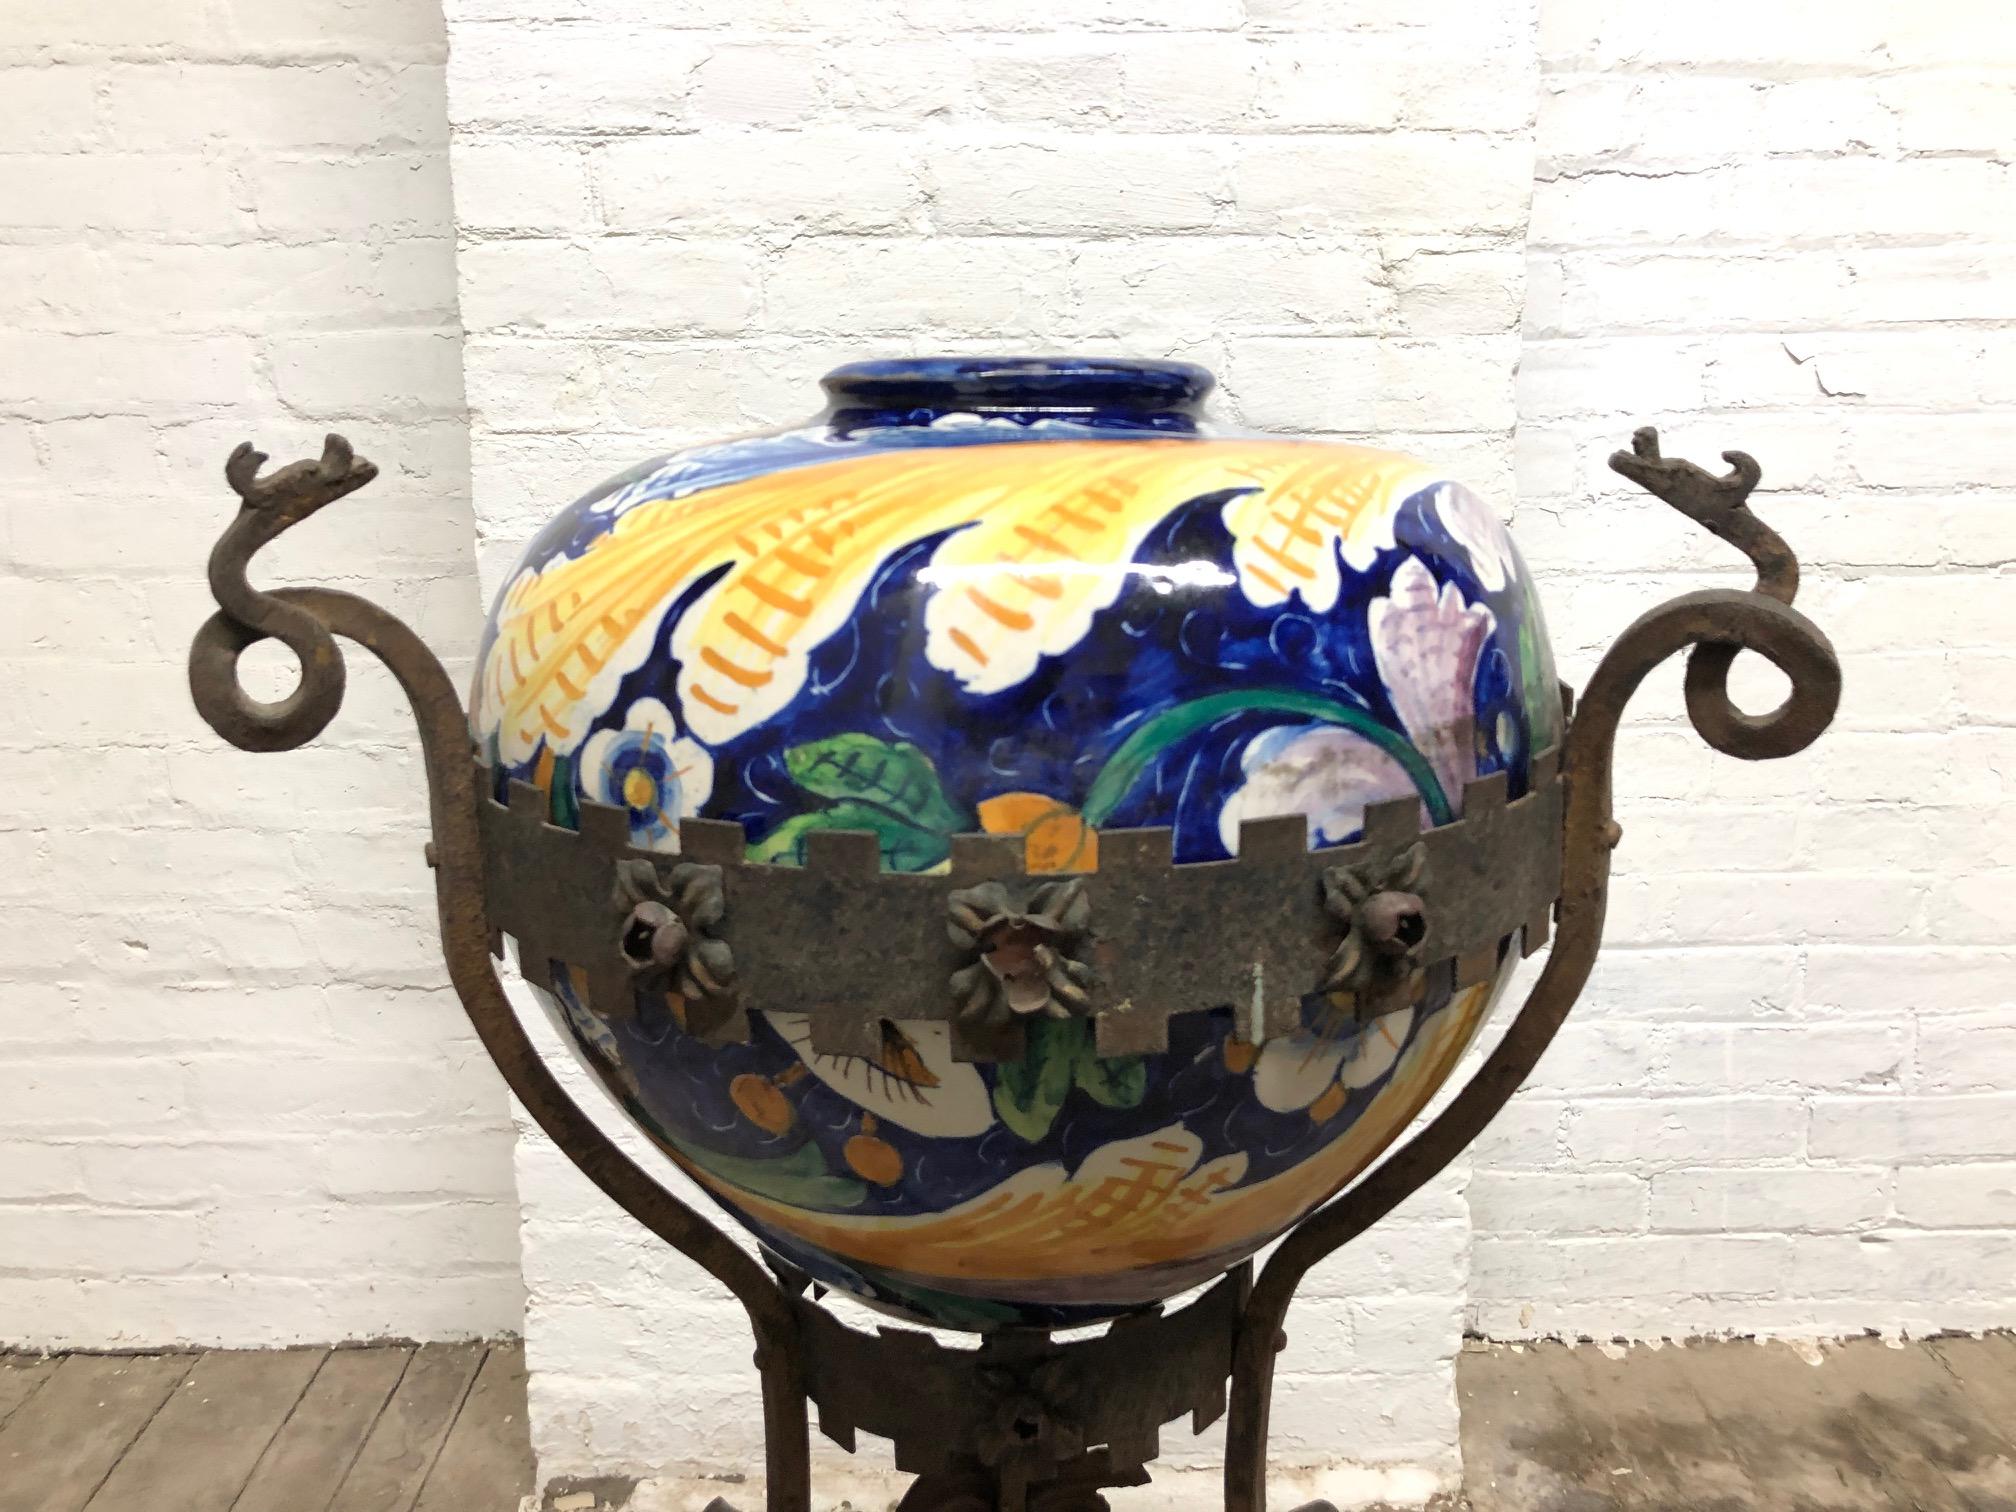 Antique, Italian wrought iron planter with hand painted Majolica vase. Wrought iron base has dragon heads to the top, a floral pattern and the vase is hand painted Majolica.